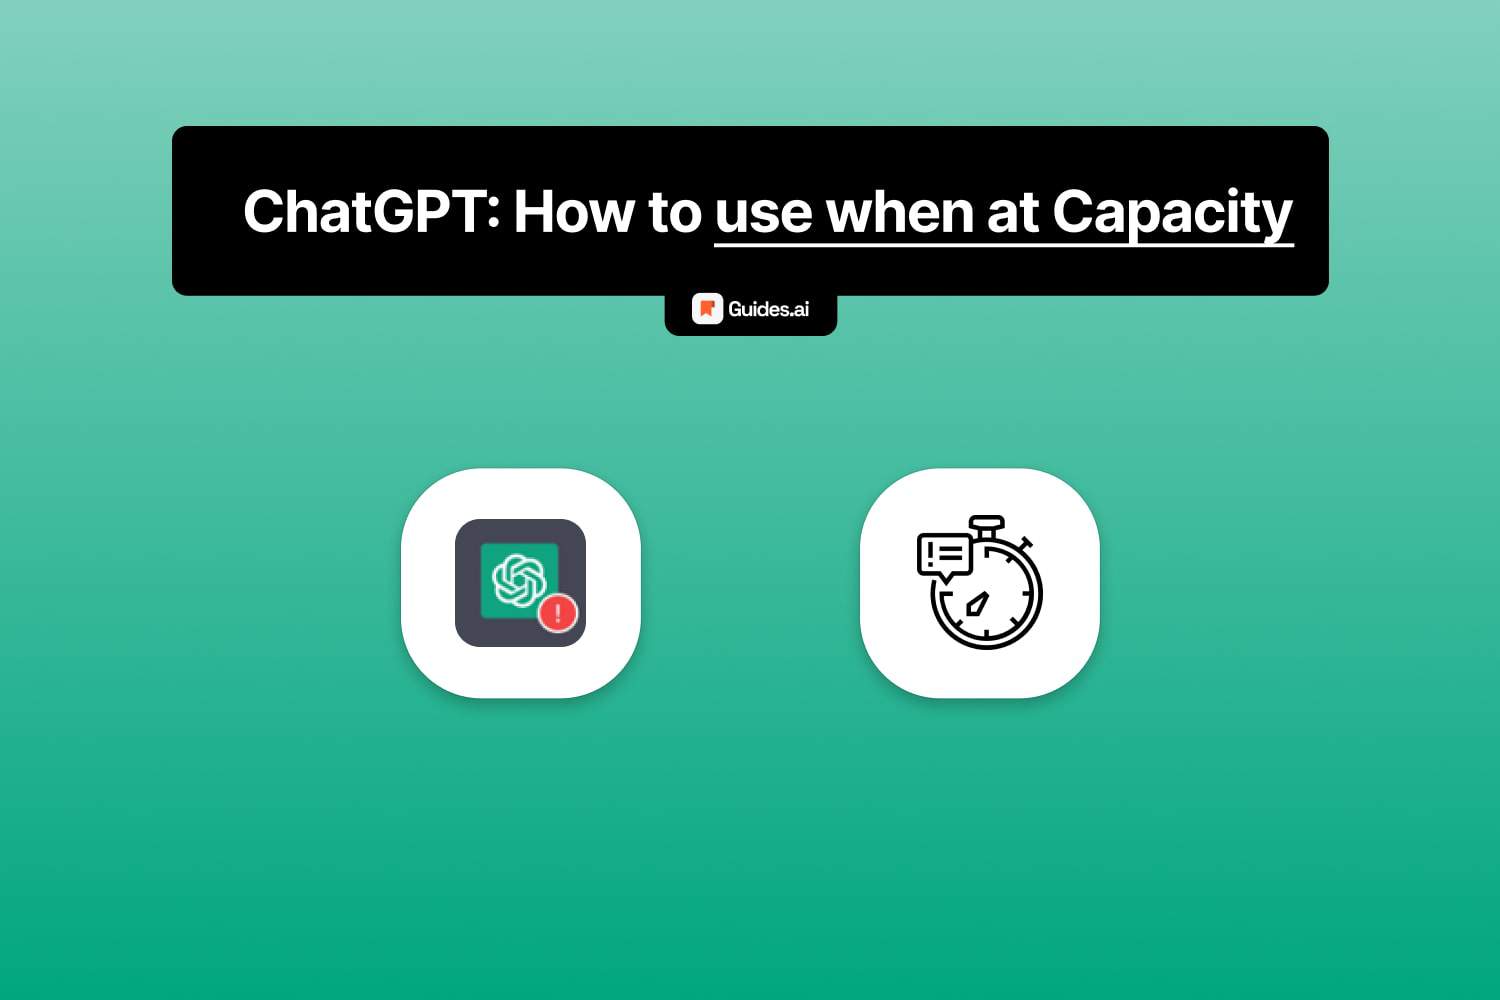 How to use ChatGPT when at capacity